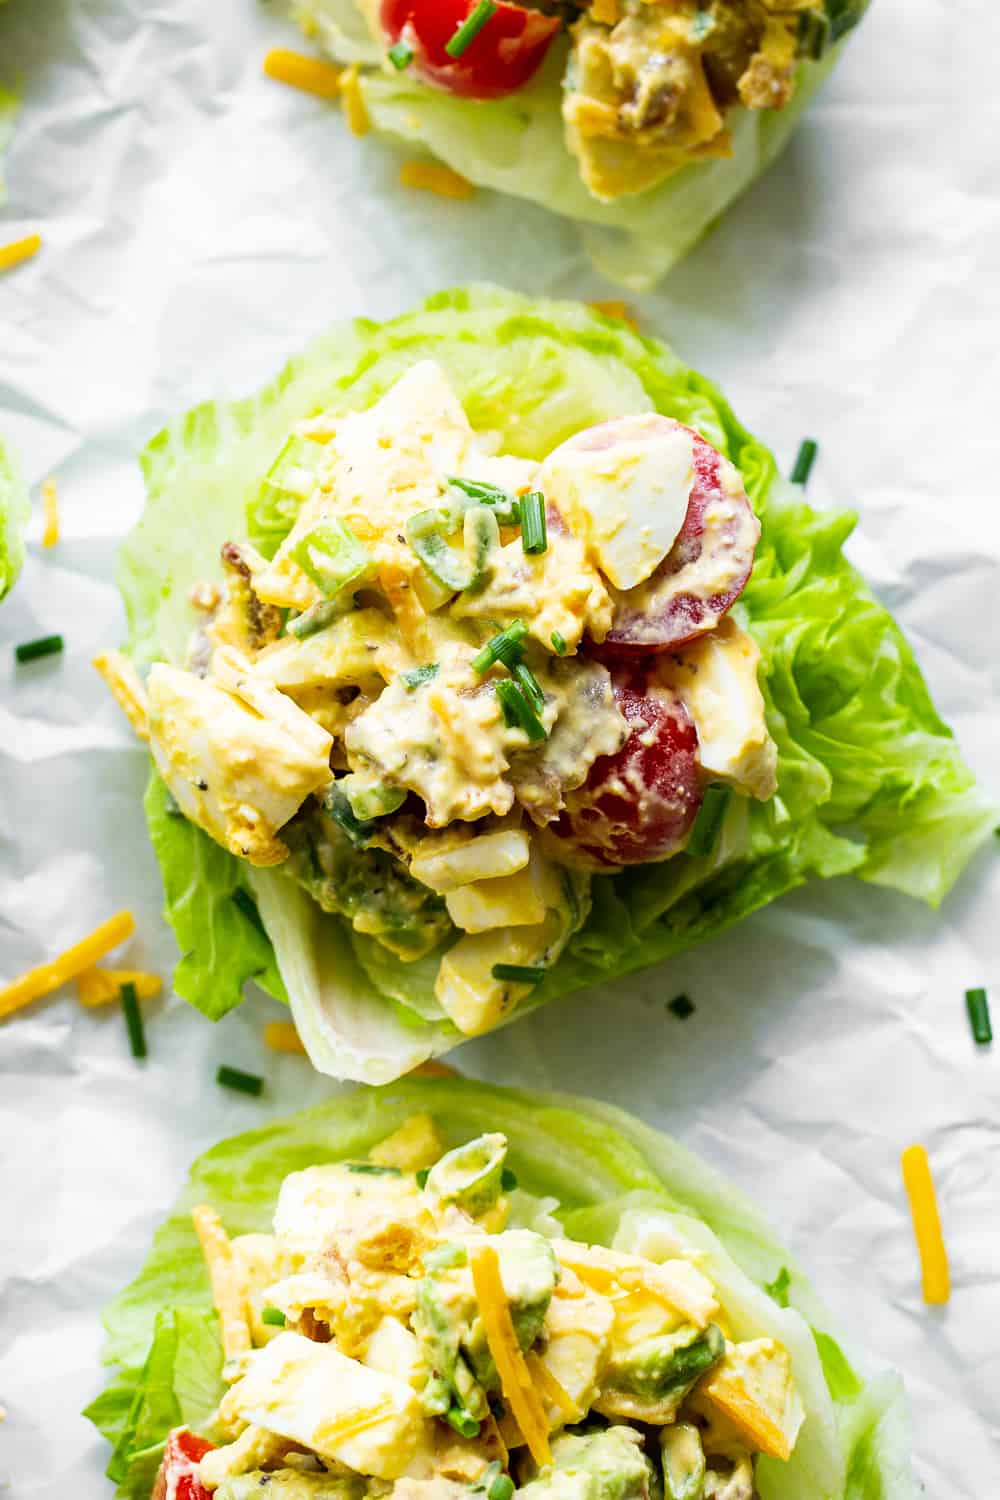 This cobb egg salad has all the goodies you’ll find in your favorite cobb salad!  Perfect for summer lunches and picnics, serve it over a simple green salad or in lettuce wraps for a protein packed meal with tons of flavor!  Paleo, Whole30, low carb and keto friendly. #paleo #keto #whole30 #cleaneating